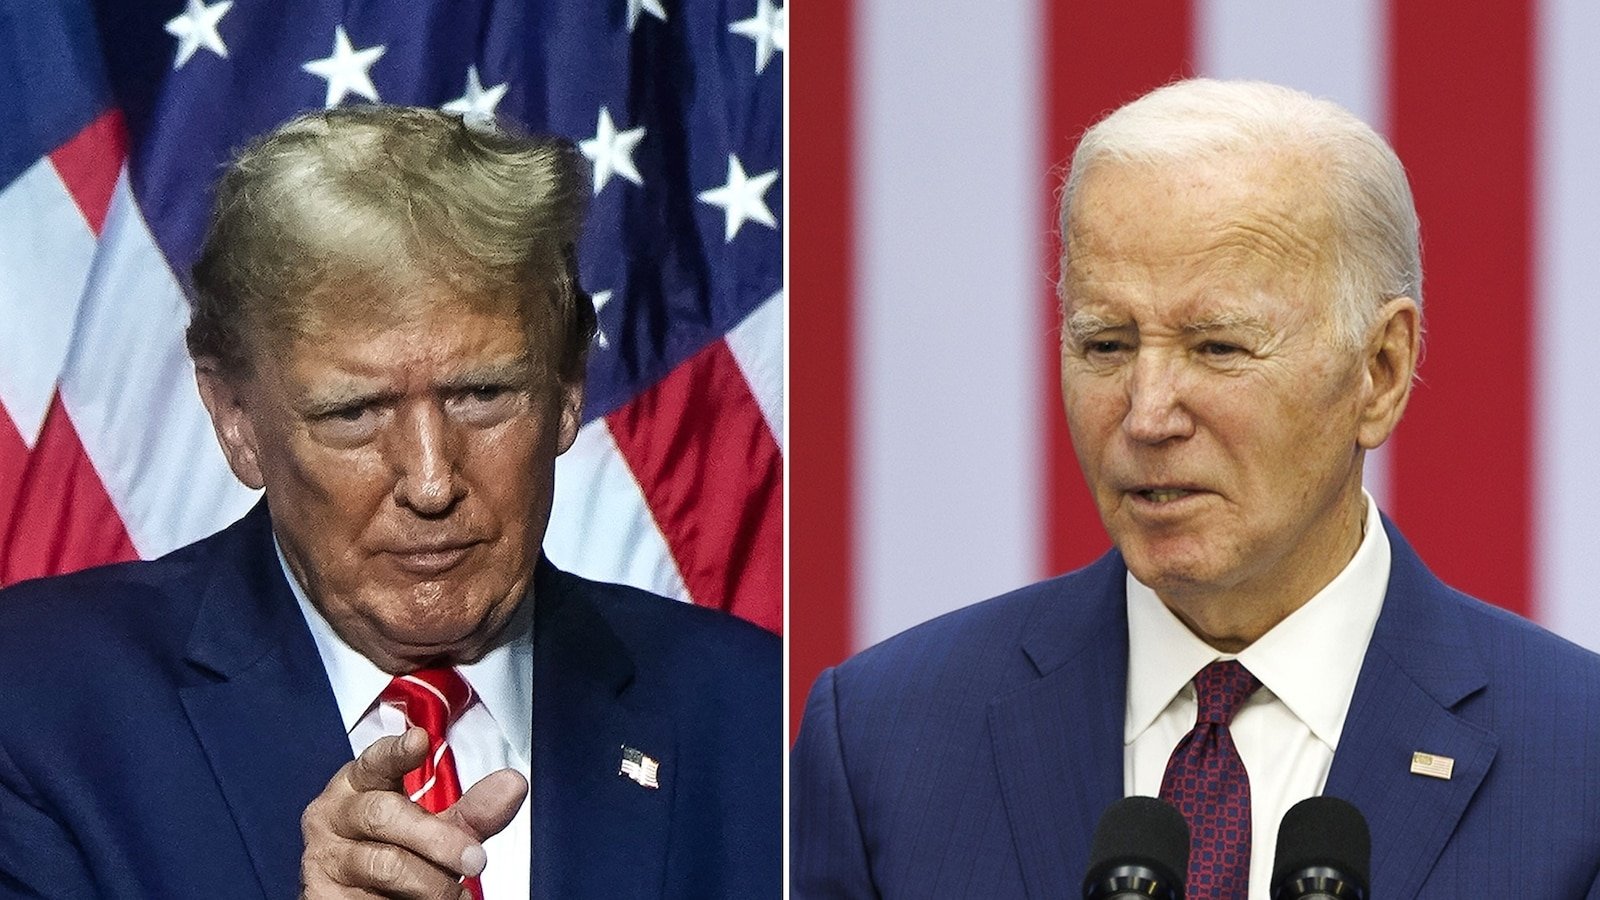 Trump says Biden will be 'worthy debater' after previously attacking mental fitness